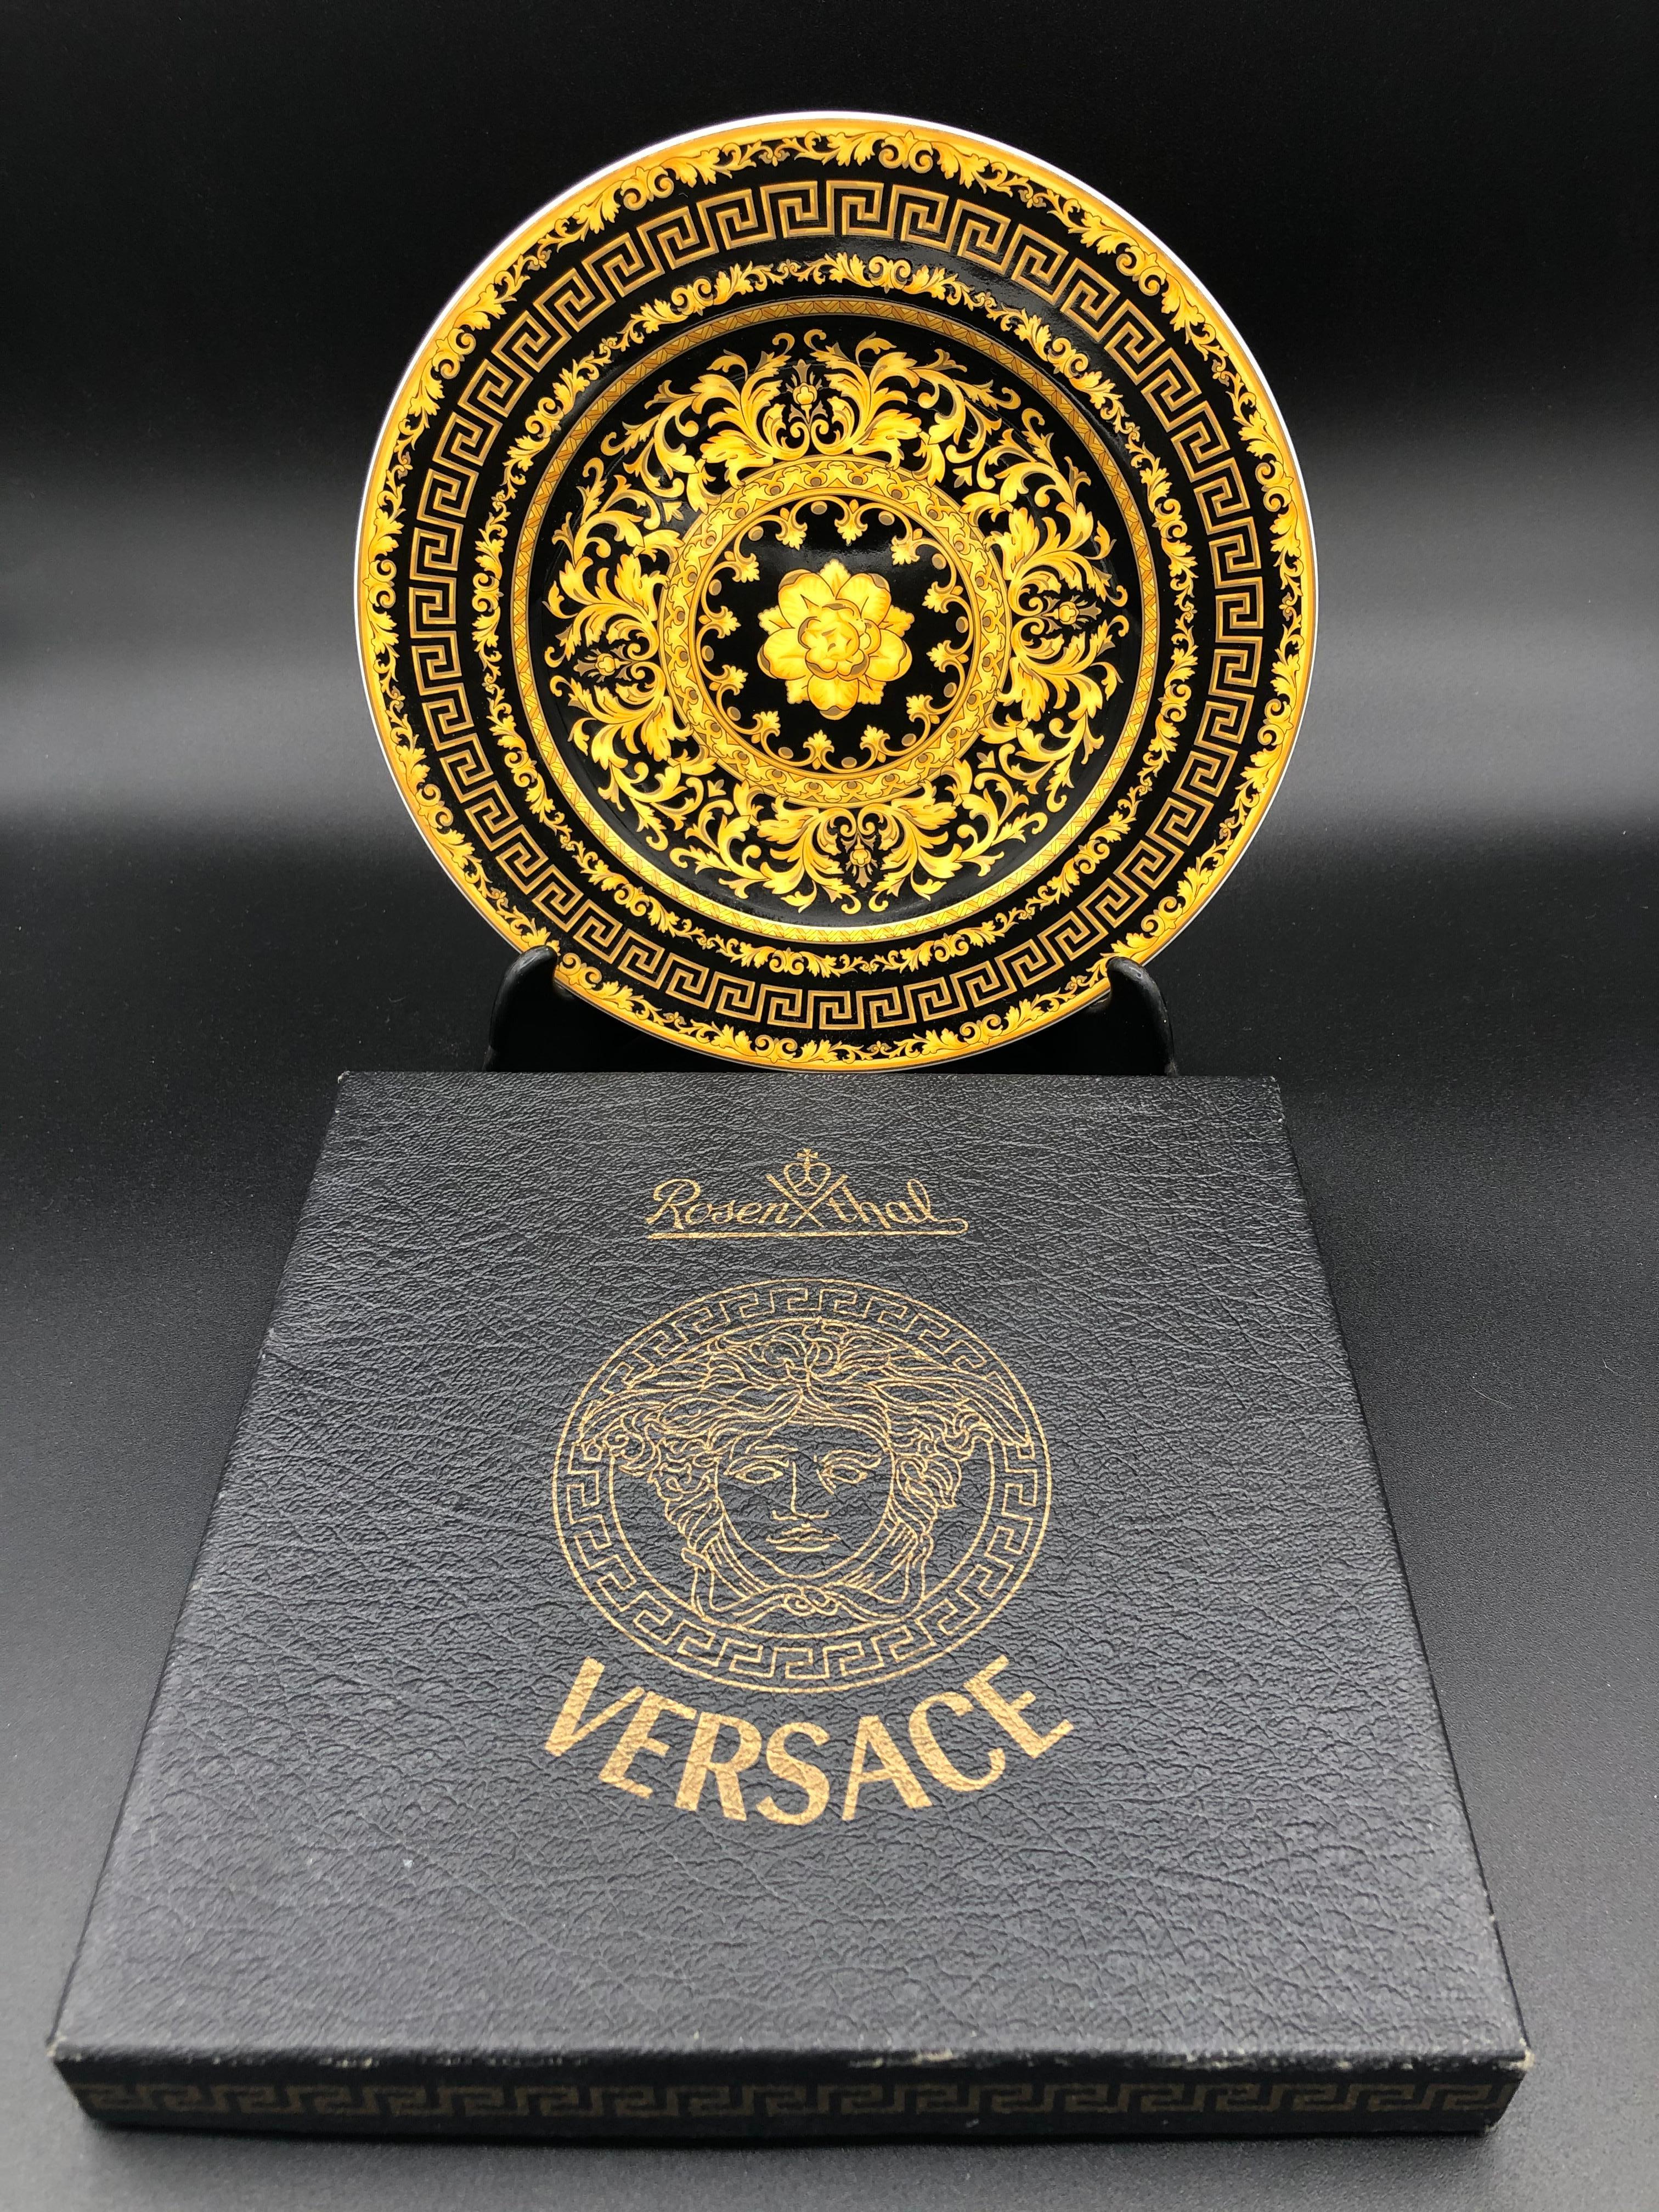 Rosenthal Versace ‘Floralia Gold’ Plate Boxed. The plate is a work of art and the best expression of both, the elegant and sophisticated Versace style and Rosenthal porcelain workmanship. Lavish ornaments decorate this piece and make it a must have